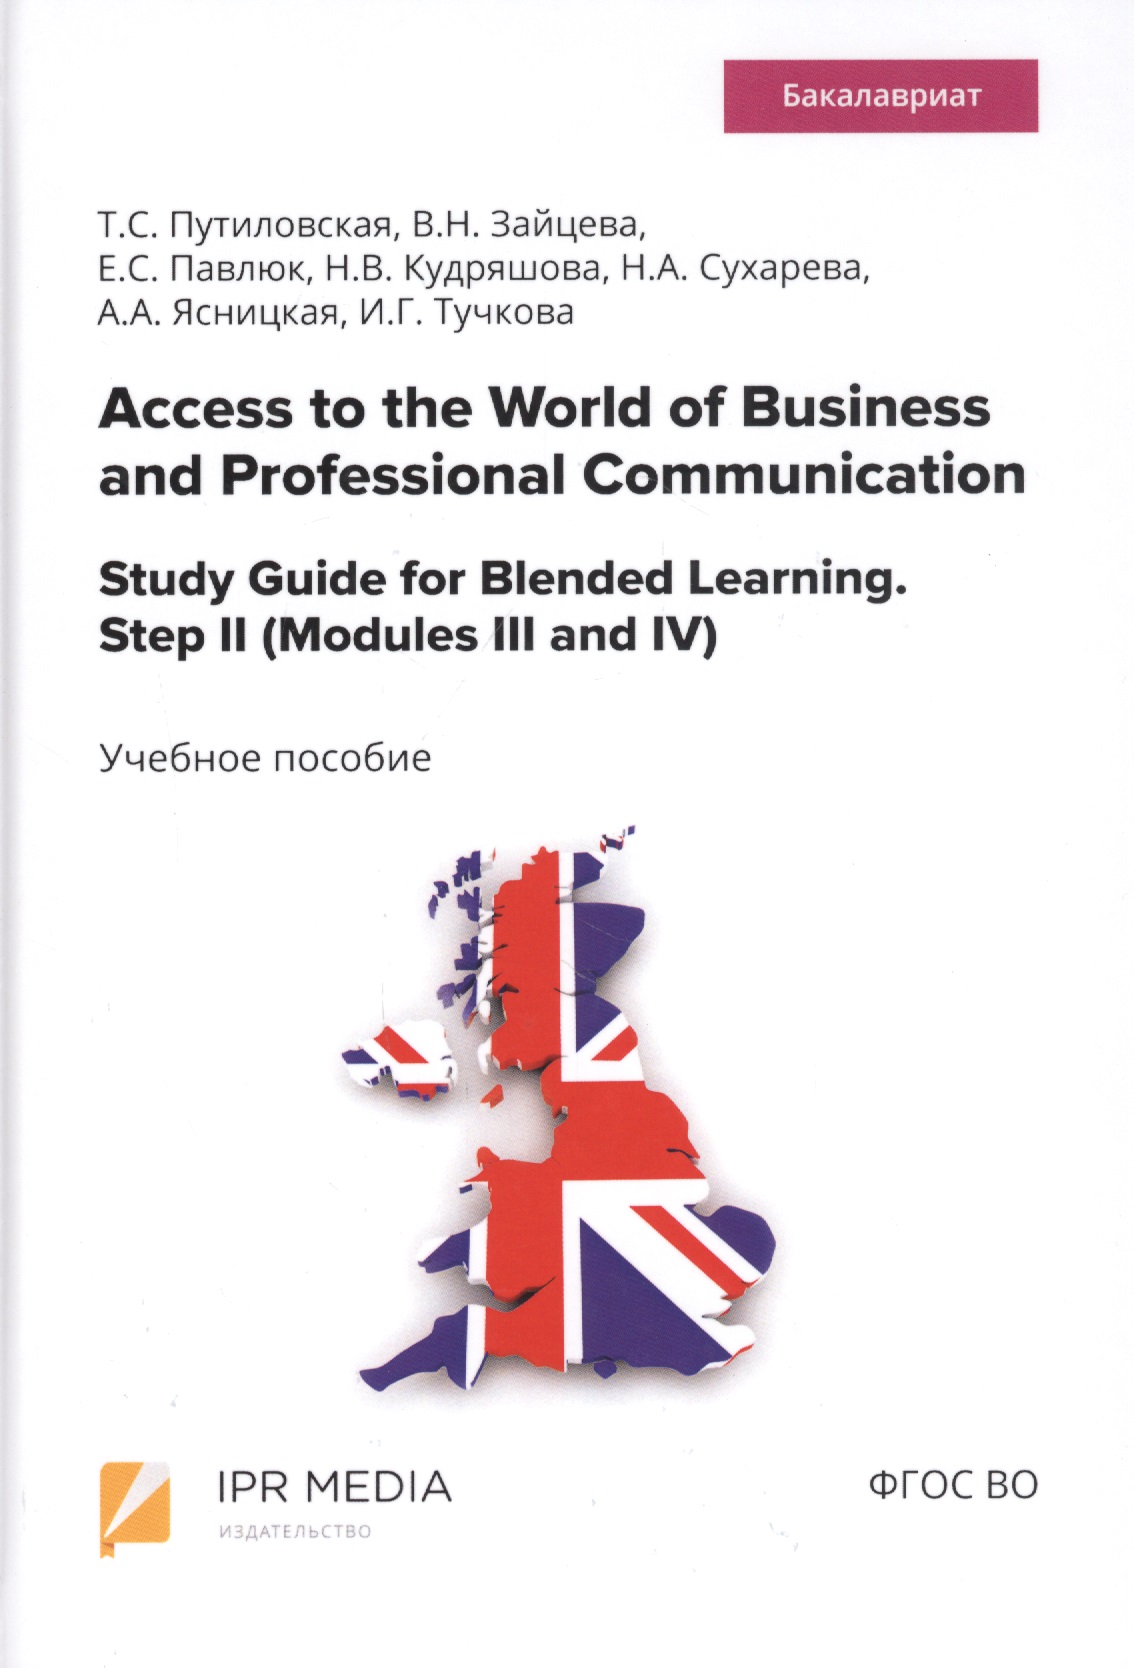 Access to the World of Business and Professional Communication. Study Guide for Blended Learning. Step II (Modules III and IV). Учебное пособие путиловская т зайцева в павлюк е и др access to the world of business and professional communication study guide for blended learning step ii modules iii and iv учебное пособие